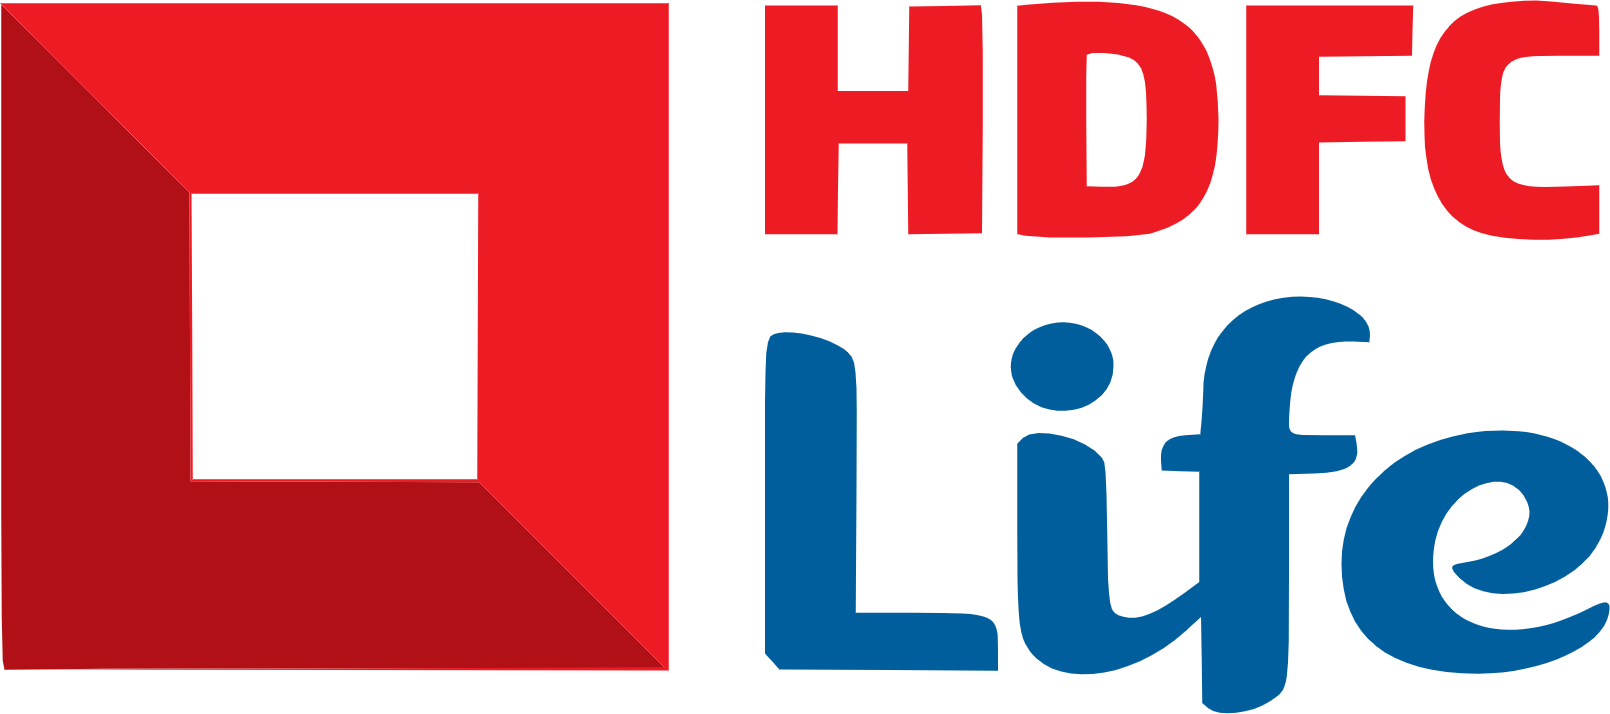 HDFC Life Insurance Company Stocks Live Updates: HDFC Life Insurance Closes at Rs 666.05, Shows Stable Performance with Beta of 0.8781 